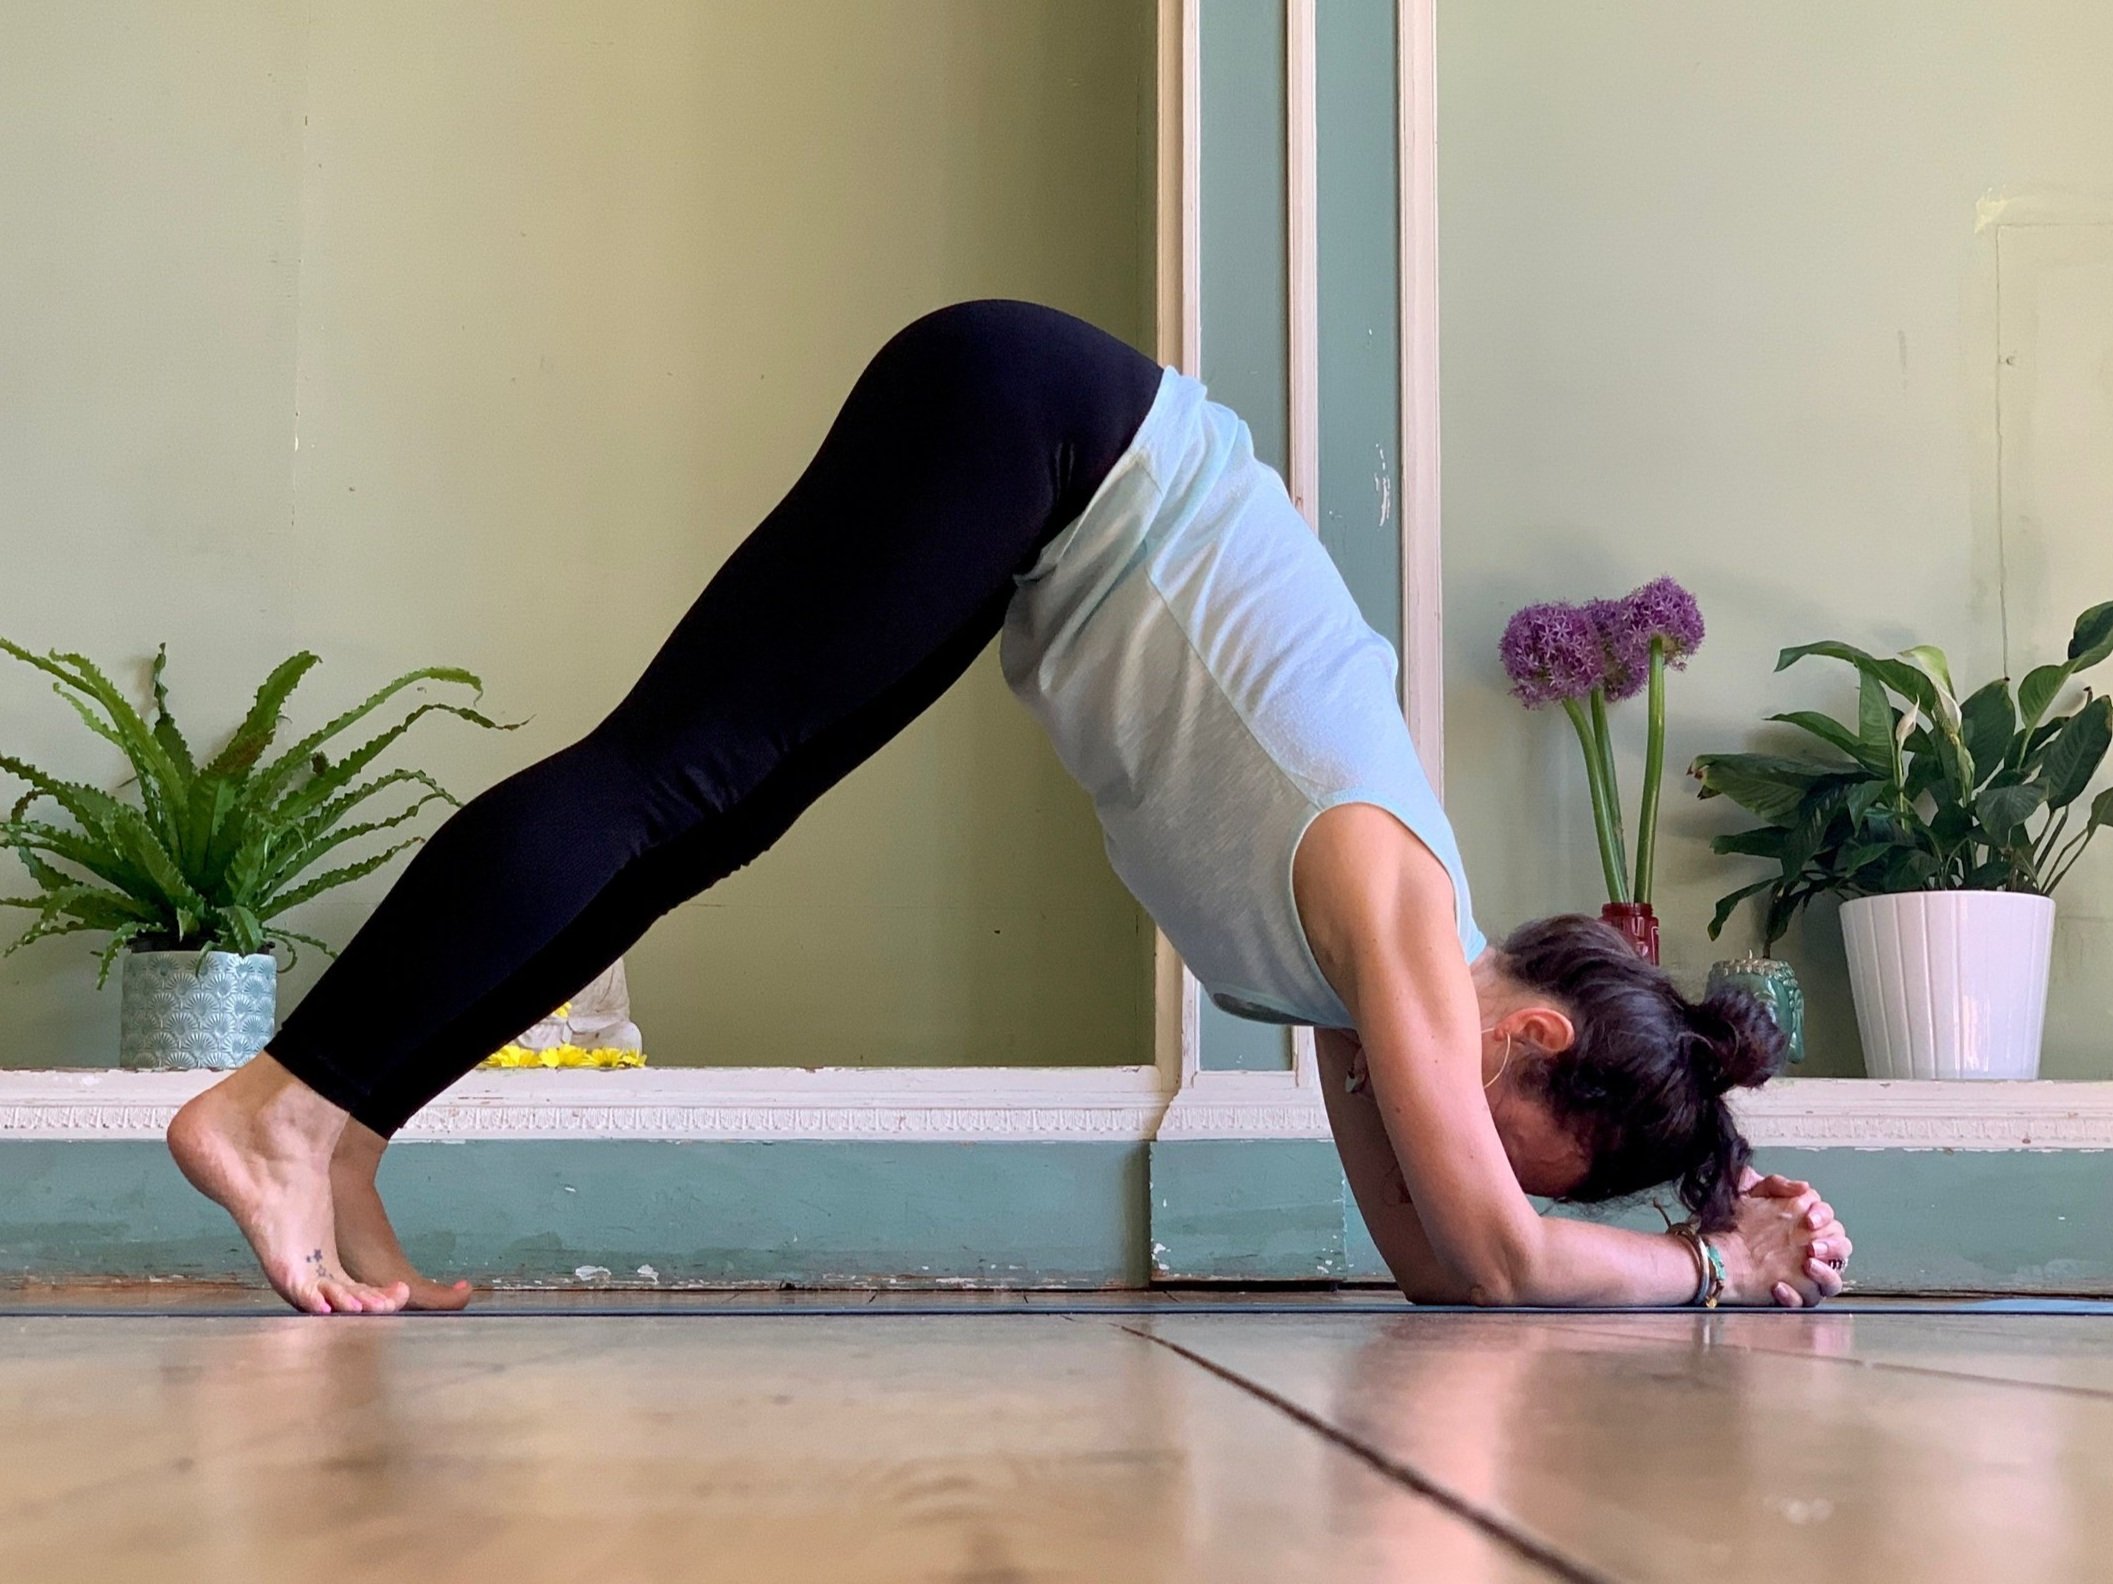 Dolphin to Headstand Transition: Learning the King of Poses - Track Yoga